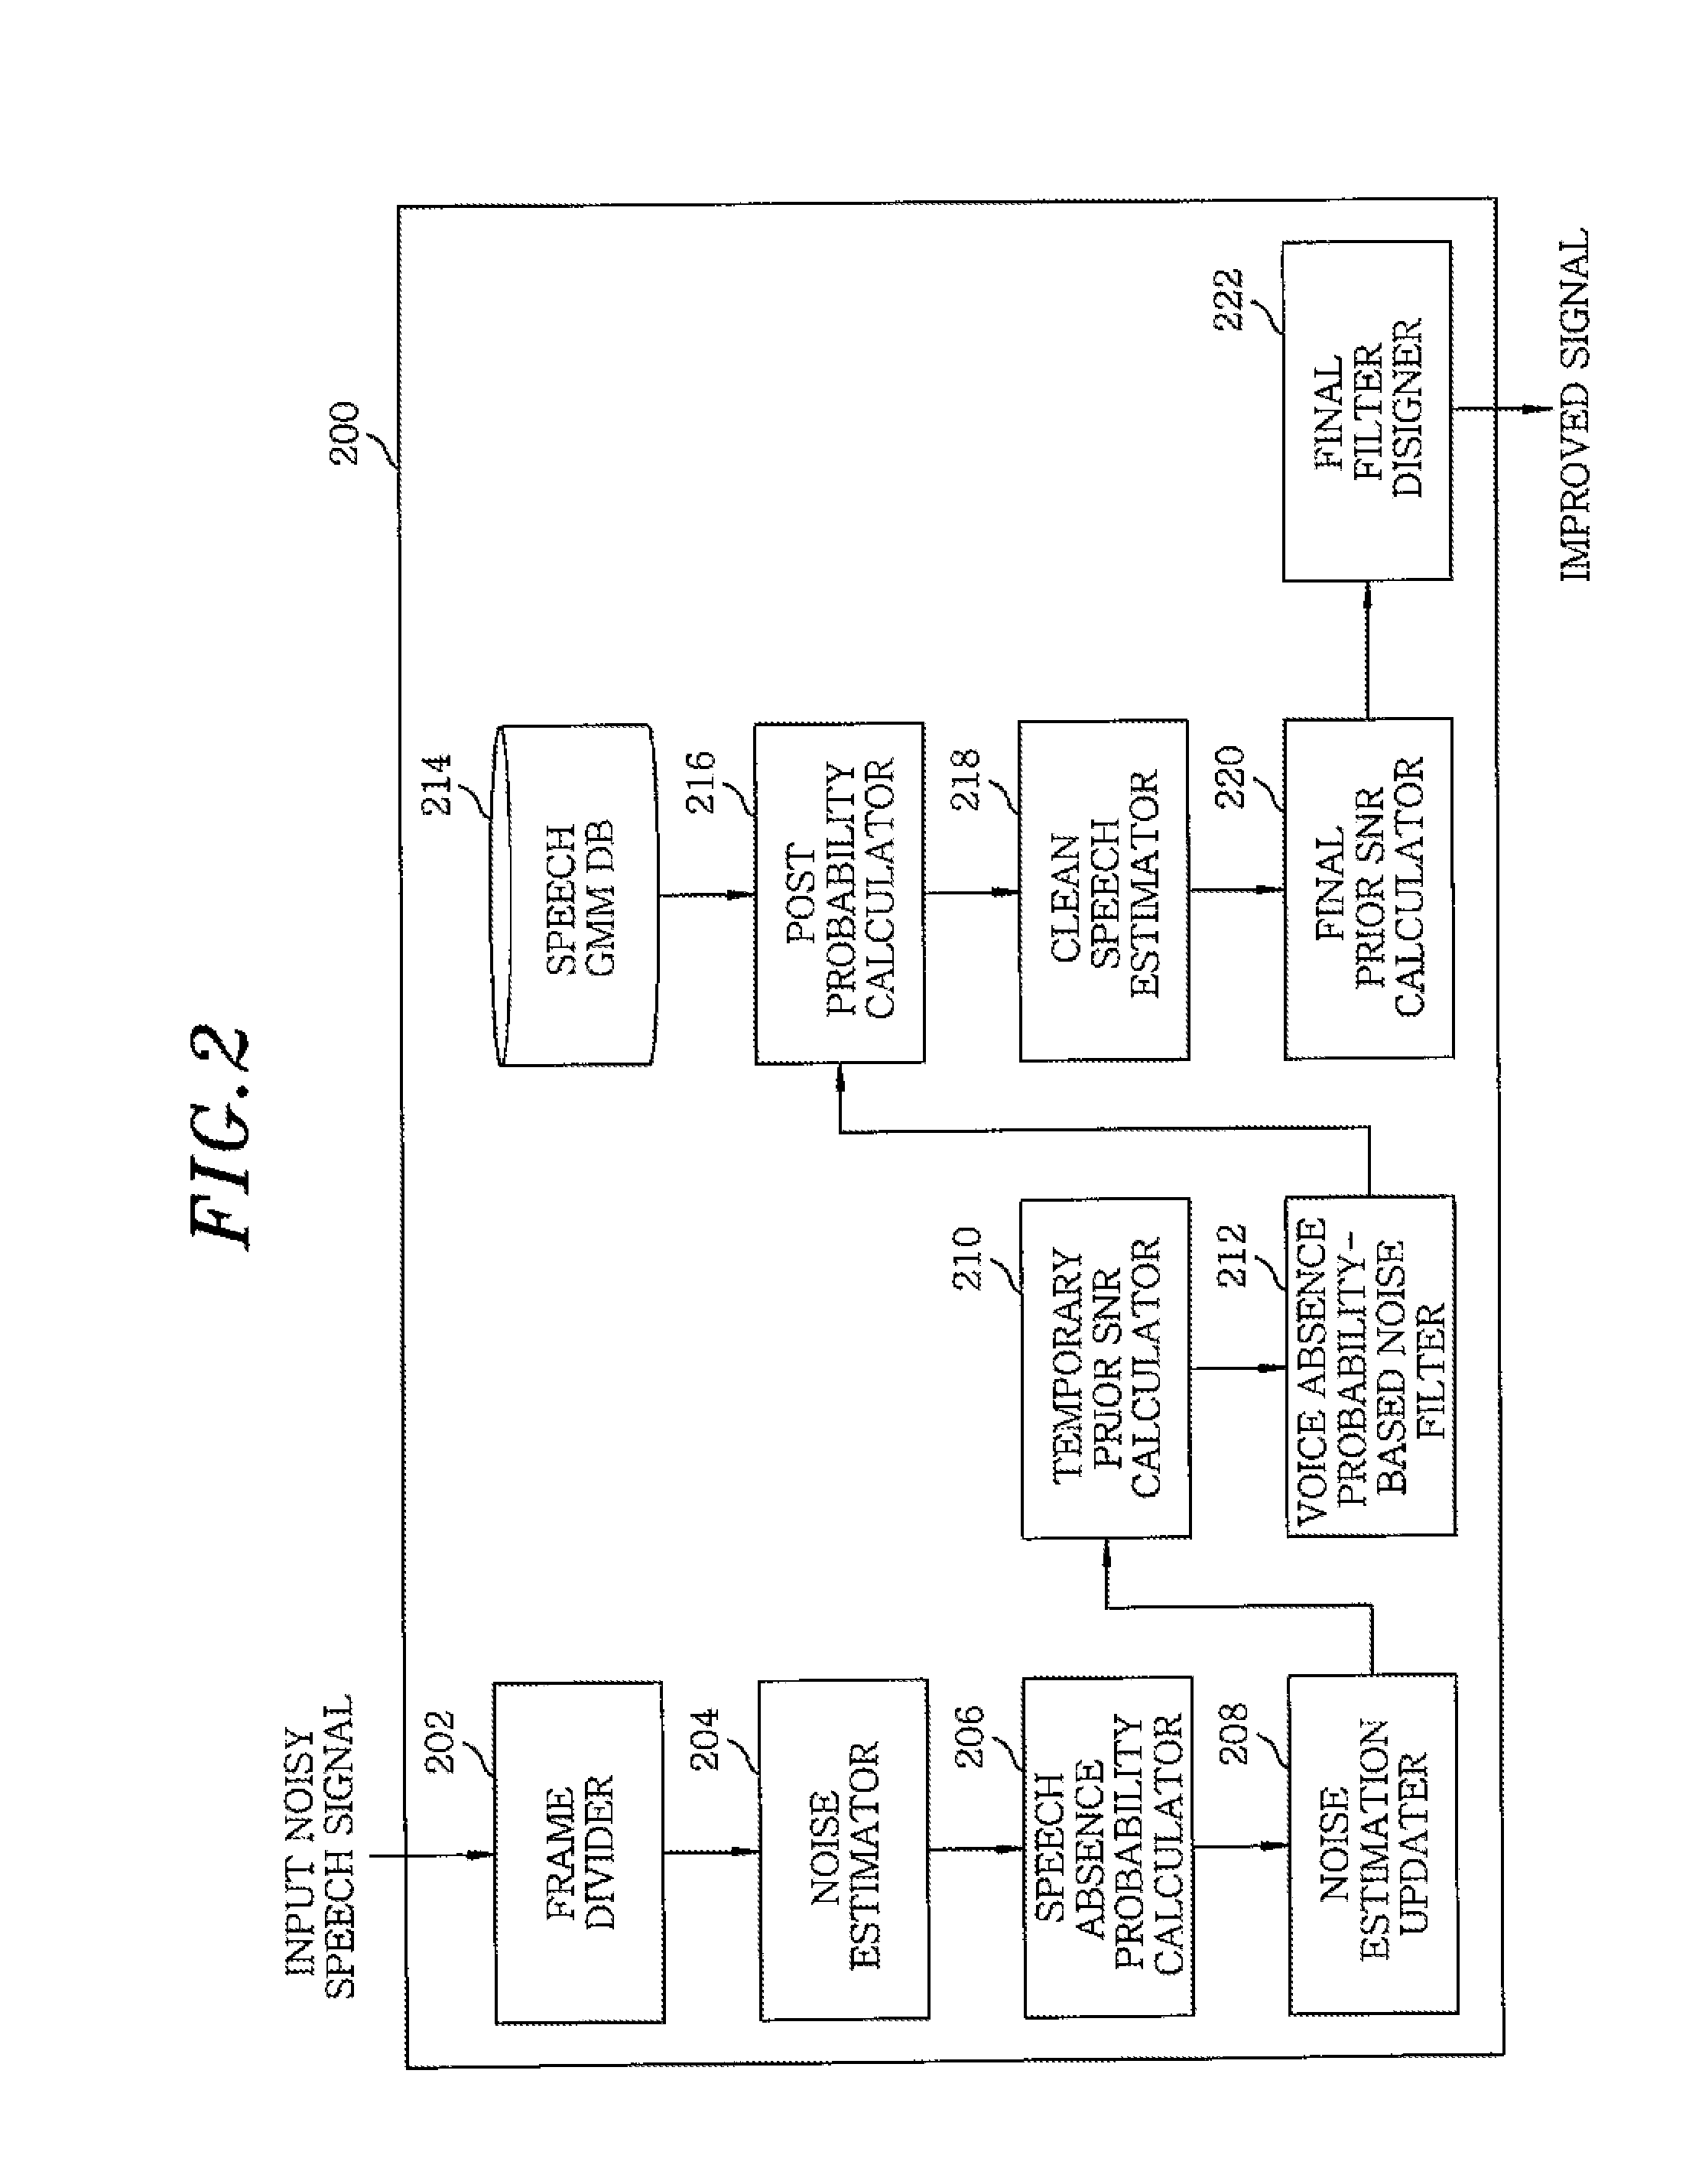 Model-based distortion compensating noise reduction apparatus and method for speech recognition